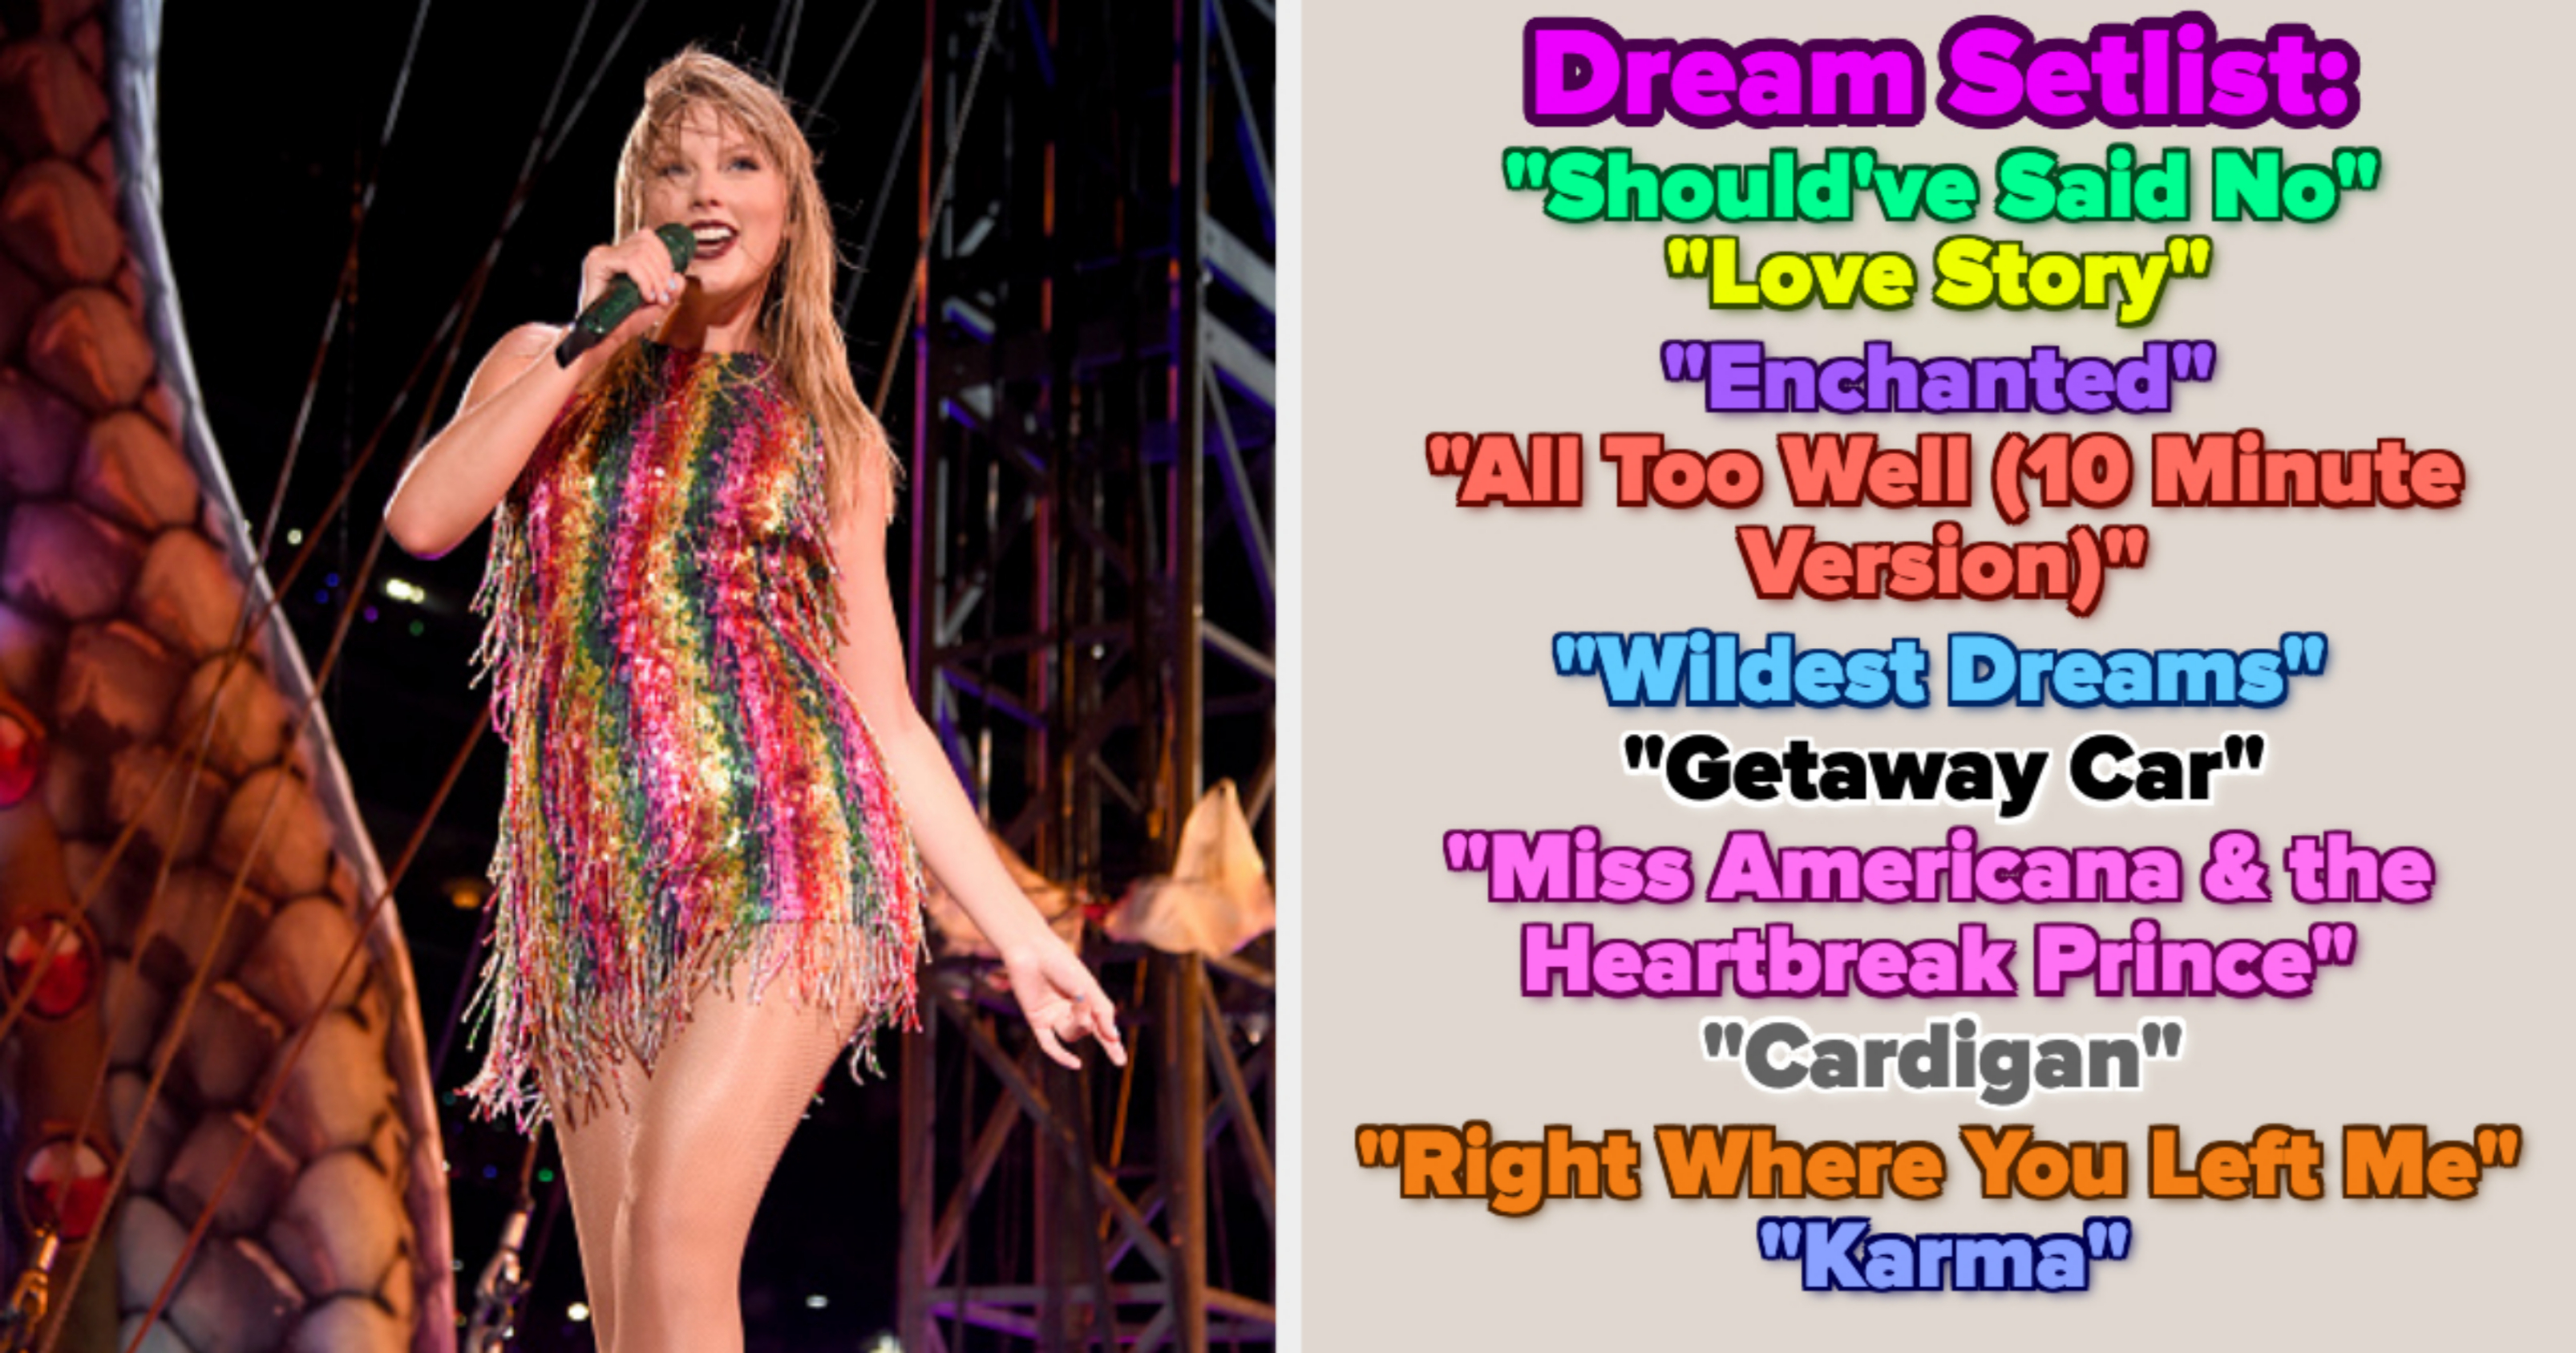 Taylor Swift: The Eras Tour' Movie Setlist: Every Song Cut and Surprise  Songs, Explained